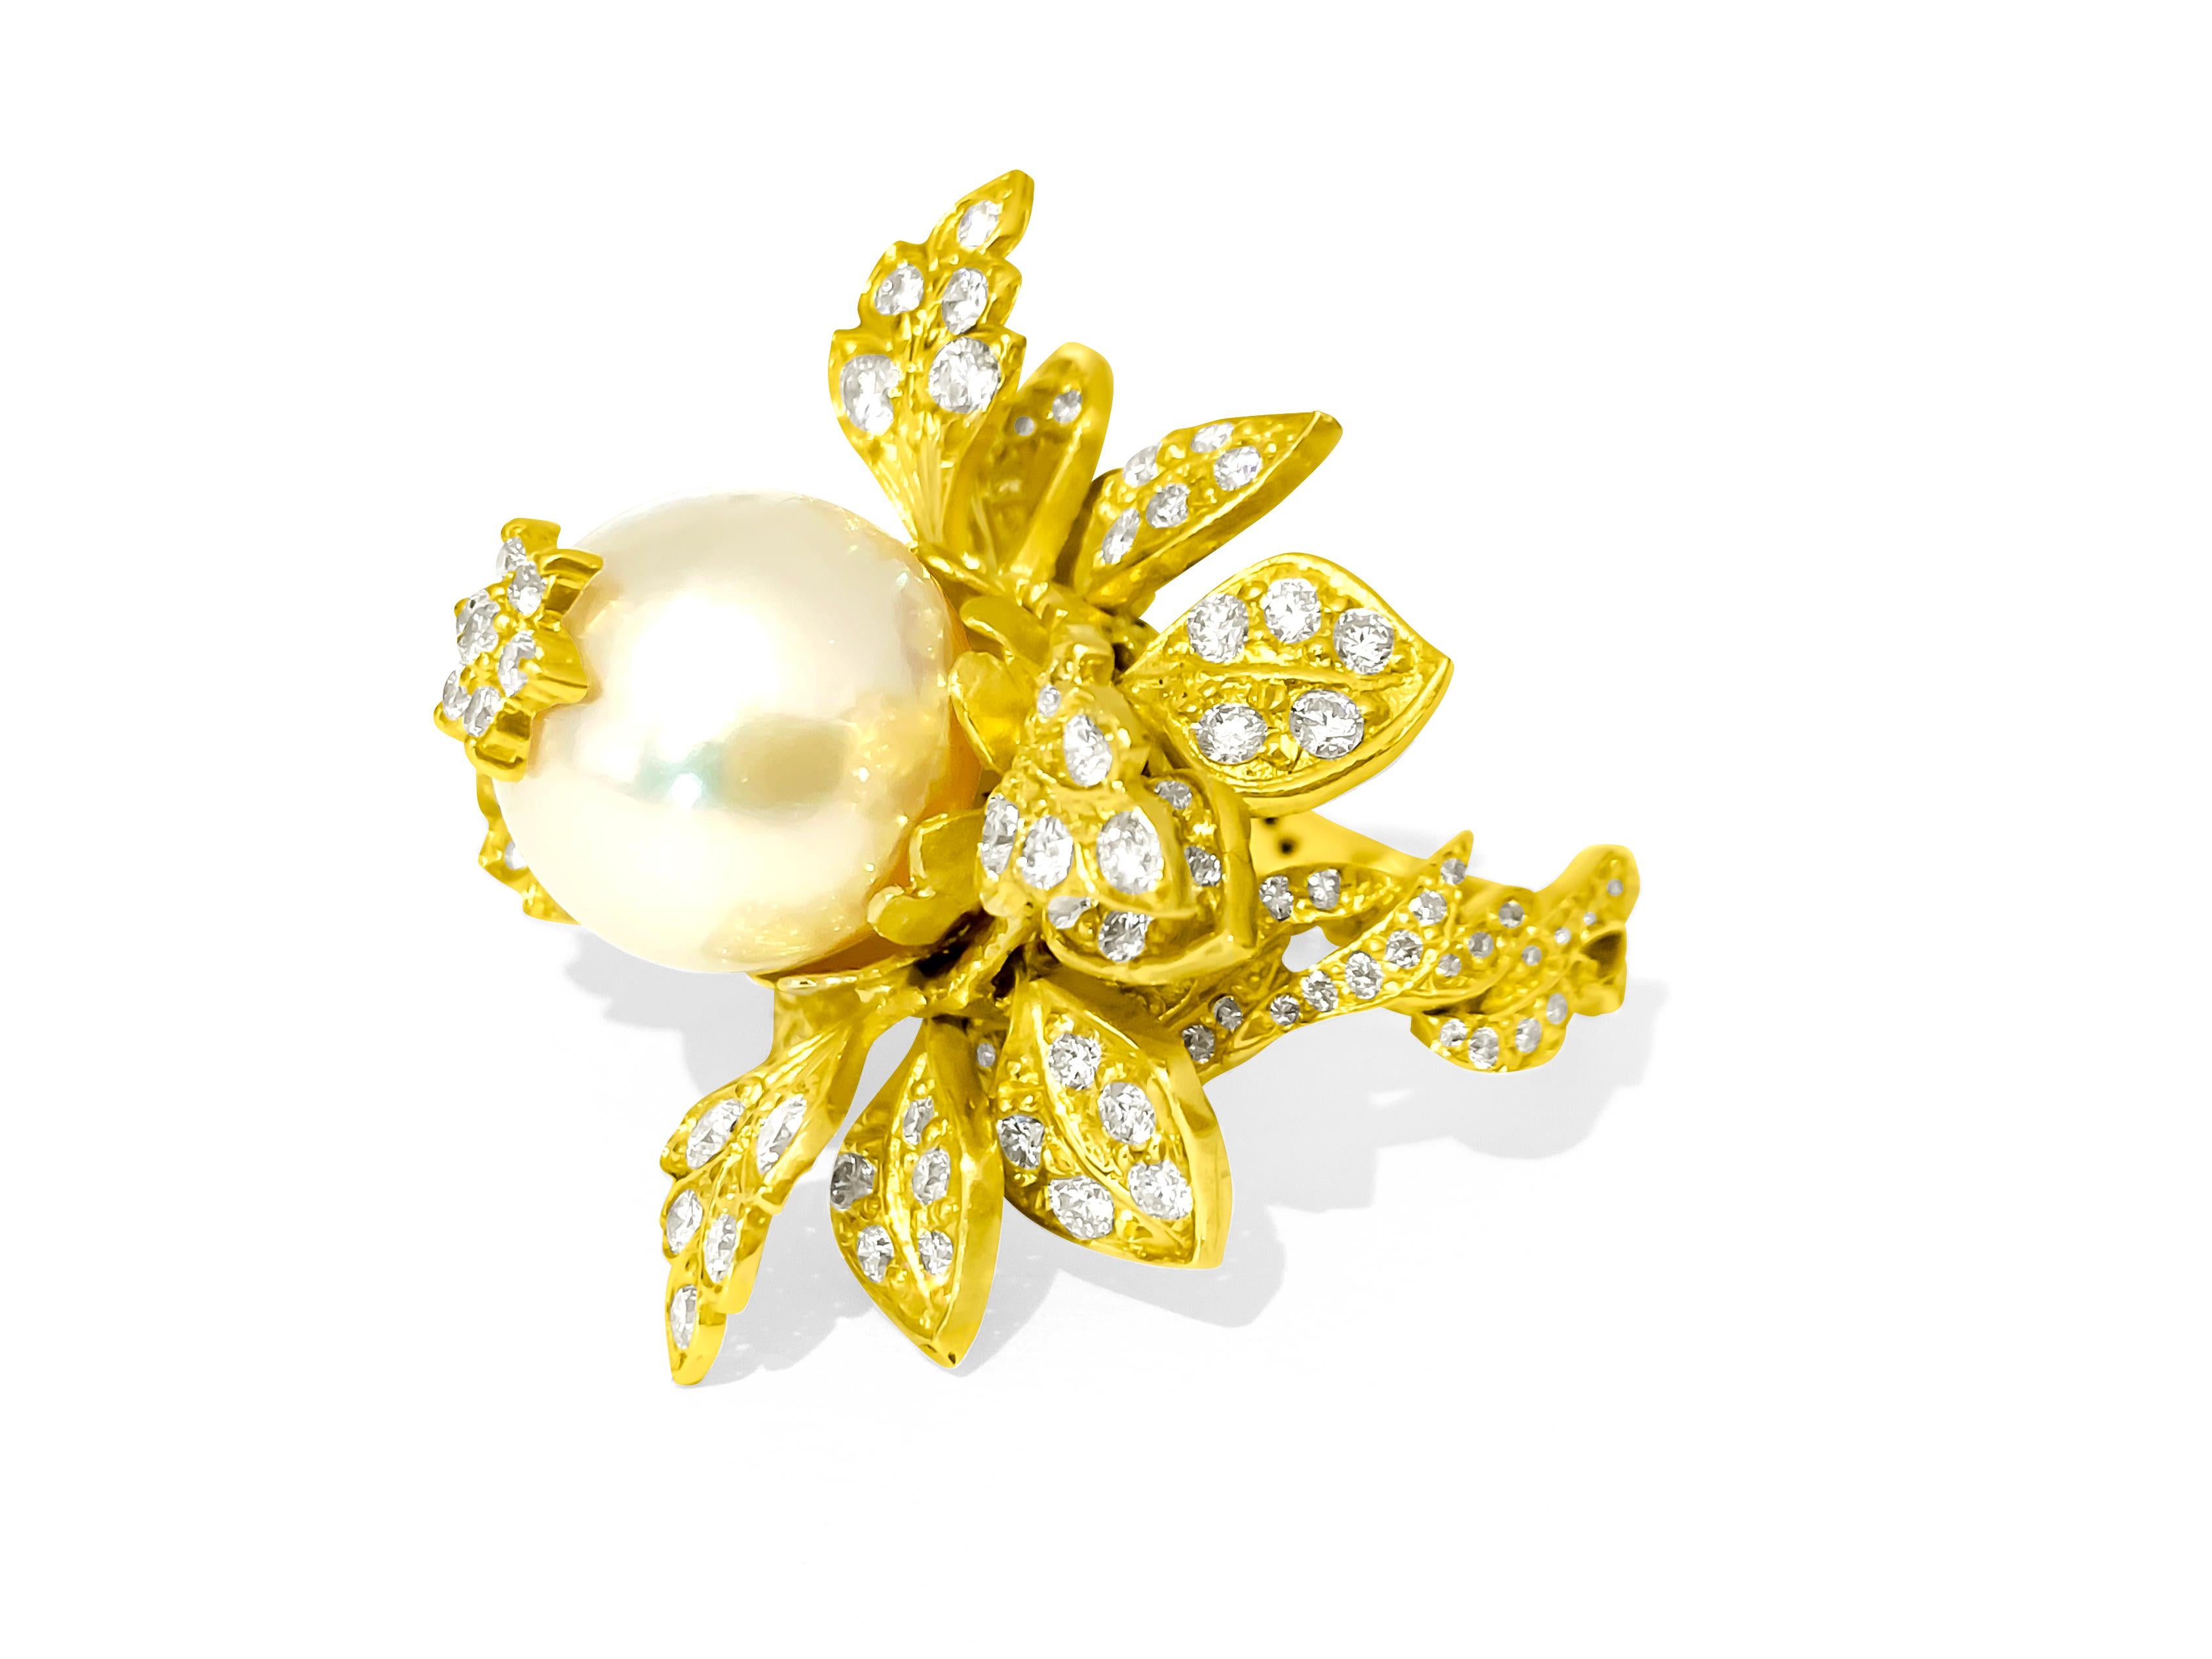 Art Nouveau Vintage 20.00 Carat Pearl and Diamond Ring in 18 Karat Yellow Gold For Sale